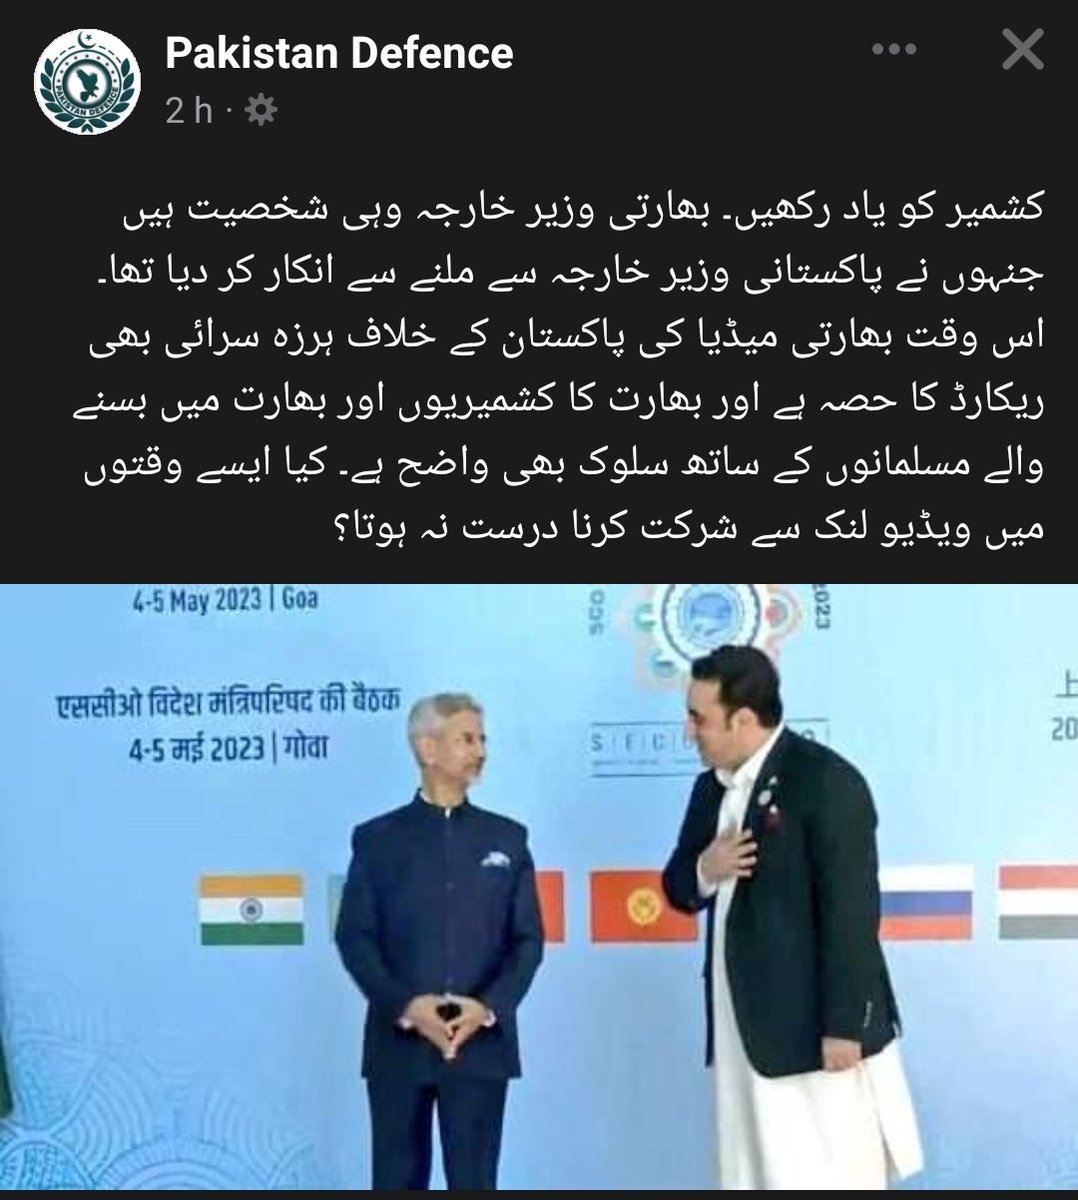 Wazir e khaja sara! On his-her field trip! 

A guy who is not even eligible to become a counsellor on his own was given the most prestigious position of the state! What a shame.

#WeStandWithKashmir #KashmirResistance #NationStandswithCJP